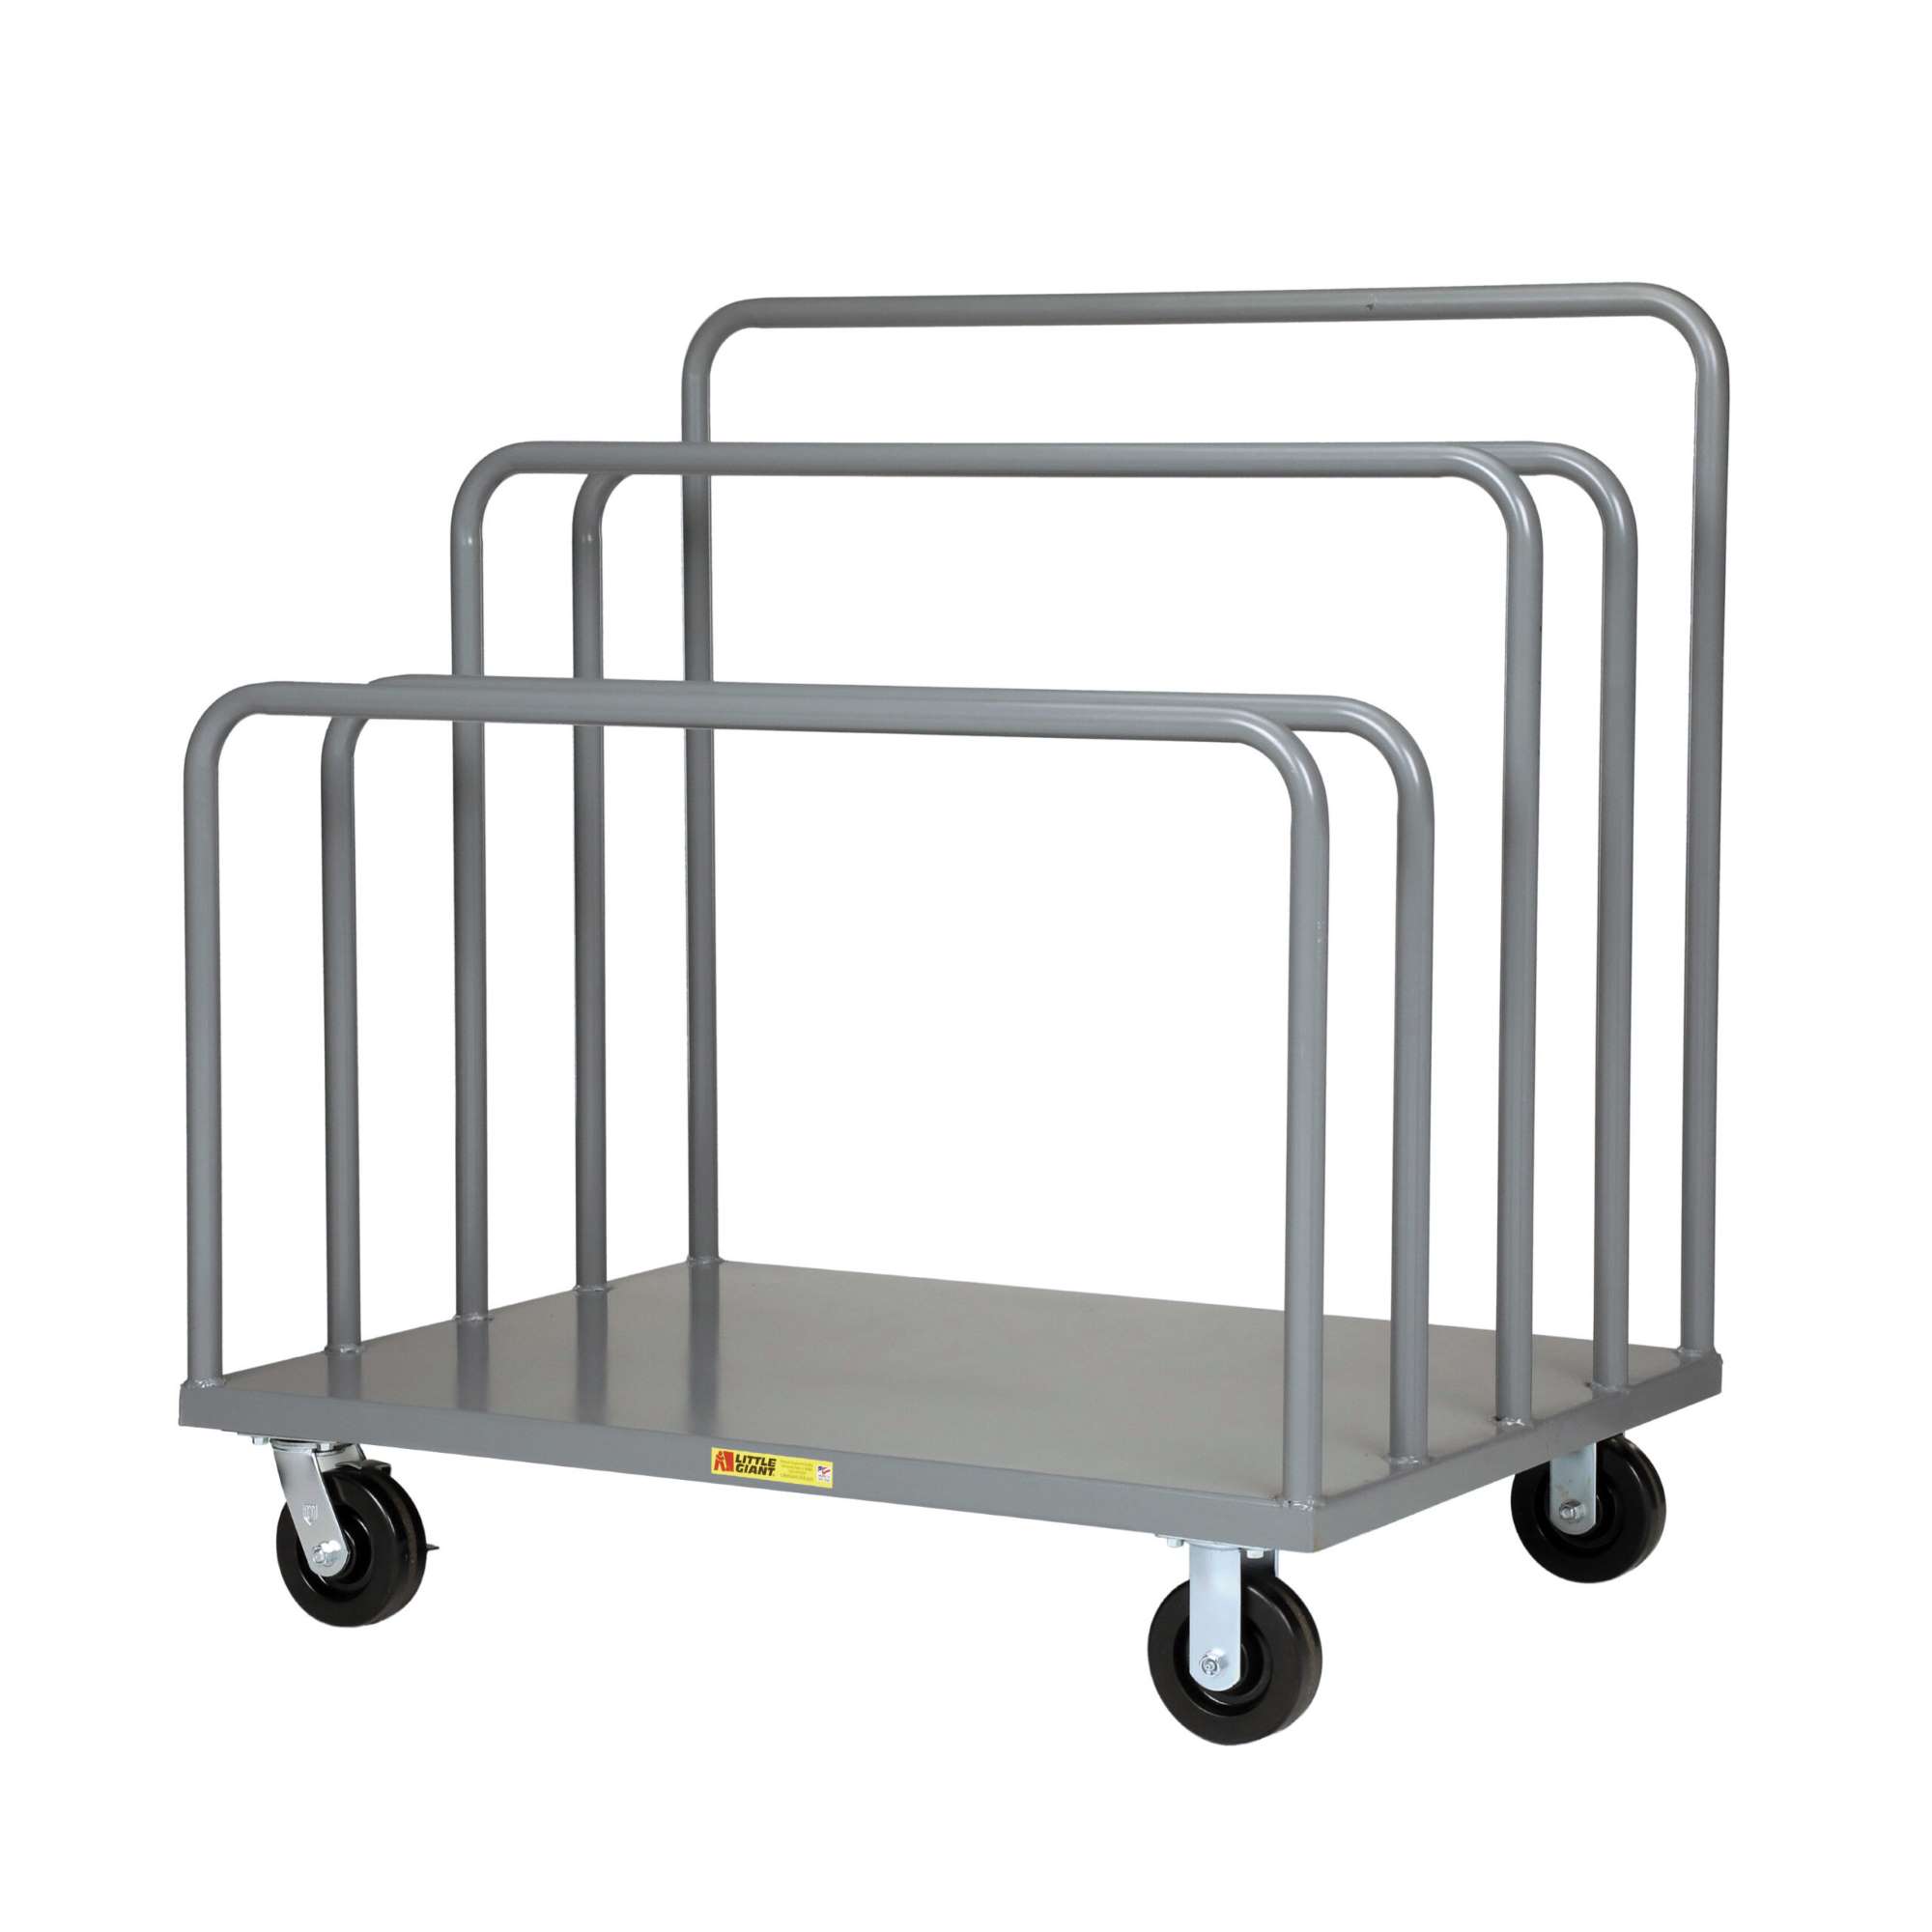 Little Giant mobile sheet rack, 1500 lbs capacity per bay, 3600 lbs total capacity, 7" between uprights, 27", 36", 42" tall uprights, 6" wheels